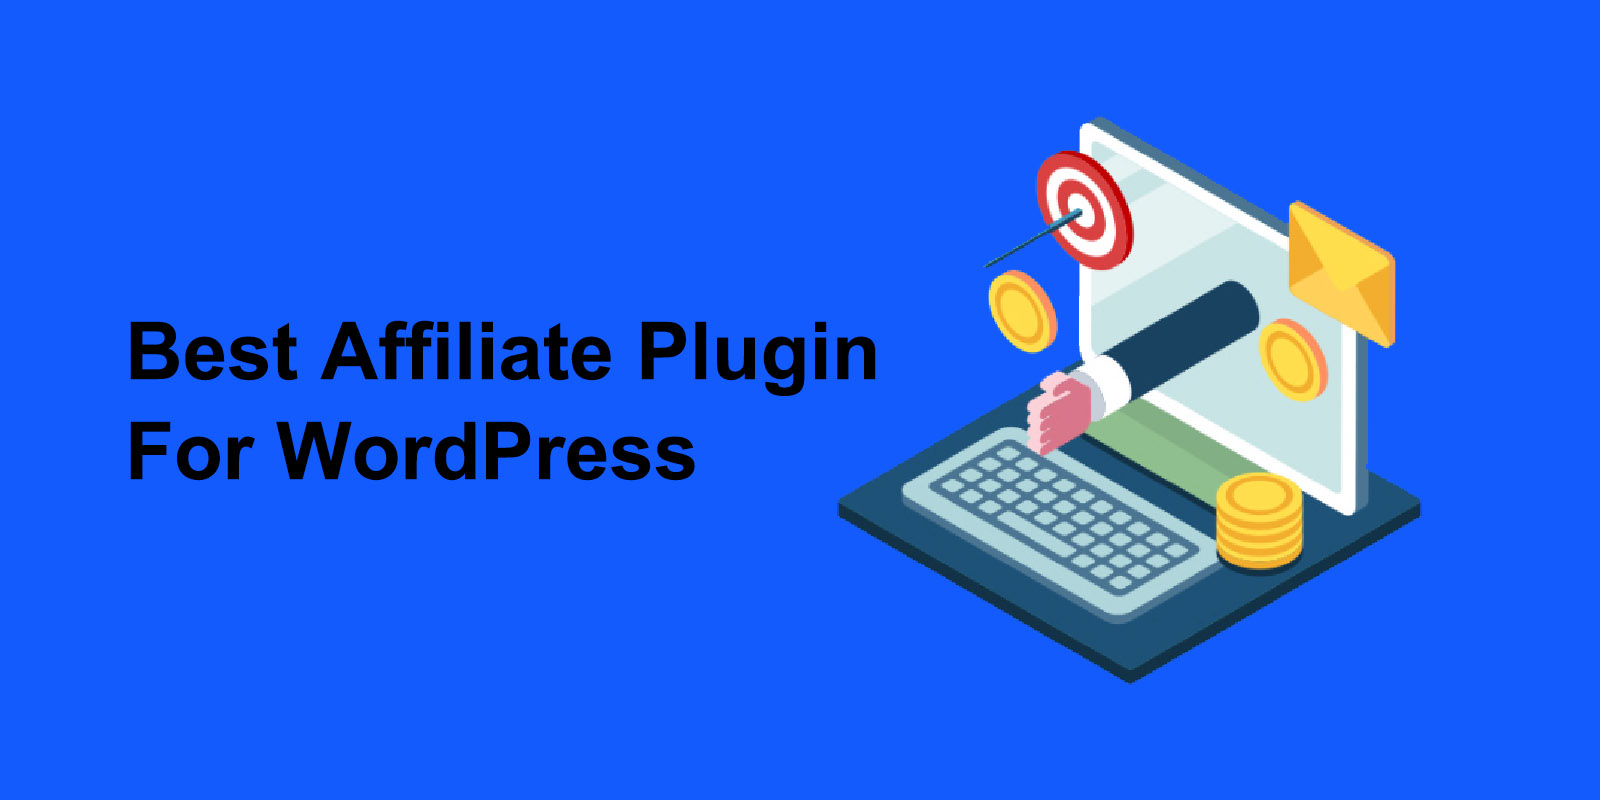 Discover the 7 best affiliate plugins for your WordPress site